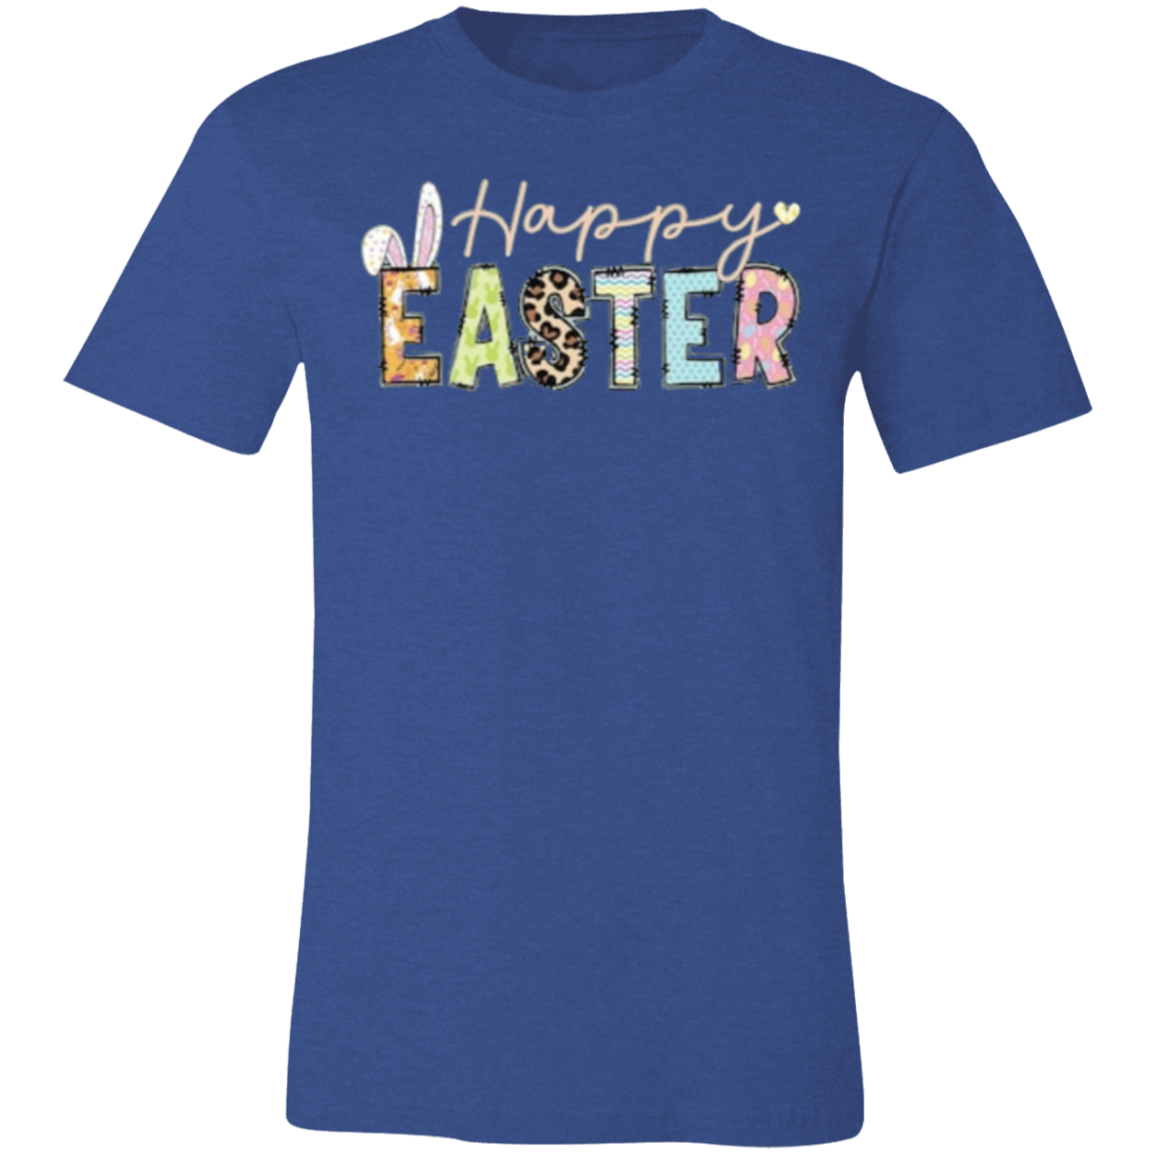 Happy Easter T-Shirt